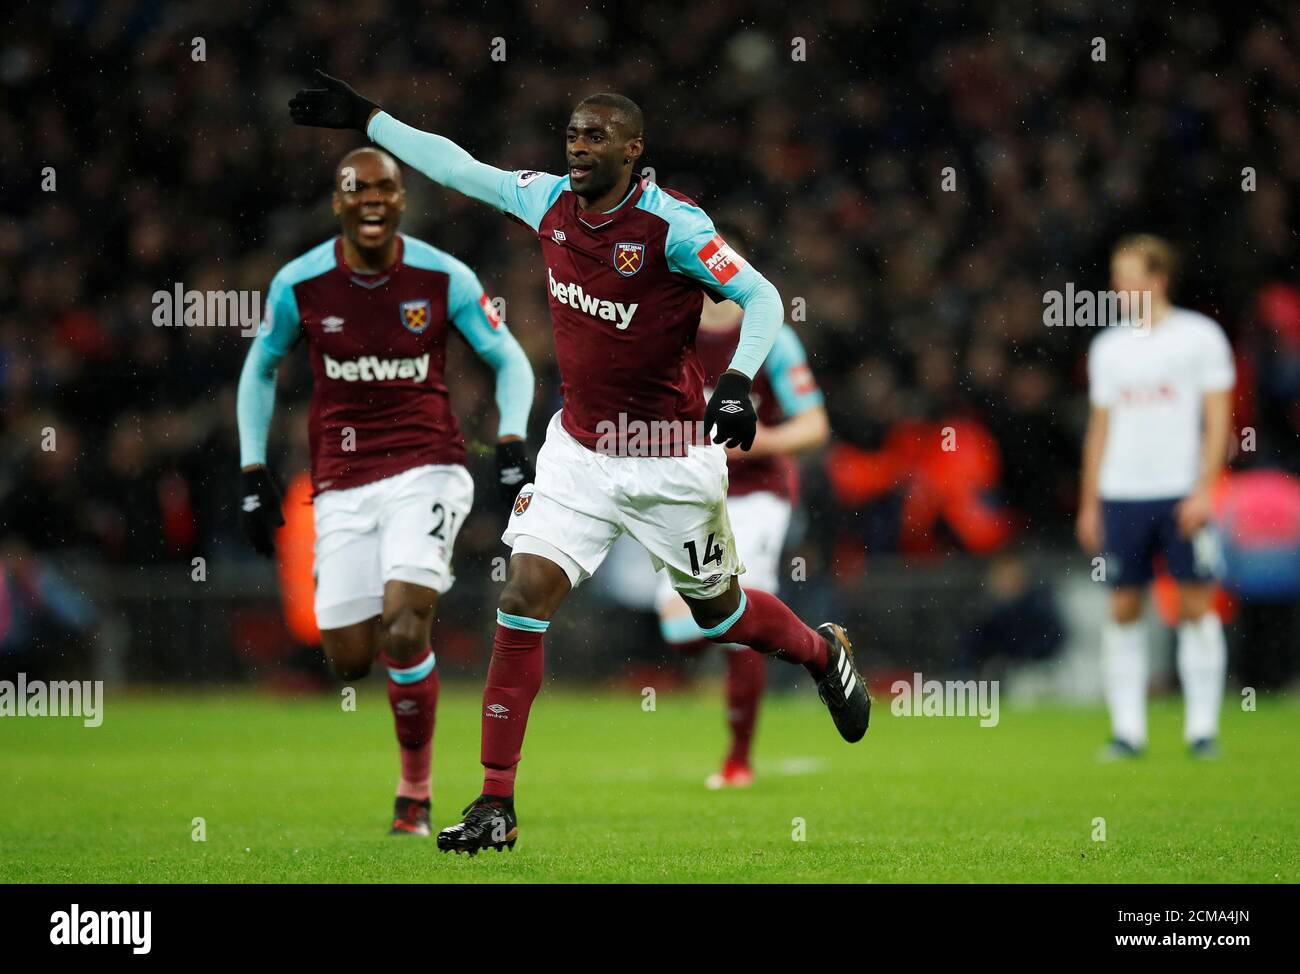 Soccer Football - Premier League - Tottenham Hotspur vs West Ham United - Wembley Stadium, London, Britain - January 4, 2018   West Ham United's Pedro Obiang celebrates scoring their first goal    REUTERS/Eddie Keogh    EDITORIAL USE ONLY. No use with unauthorized audio, video, data, fixture lists, club/league logos or 'live' services. Online in-match use limited to 75 images, no video emulation. No use in betting, games or single club/league/player publications.  Please contact your account representative for further details. Stock Photo